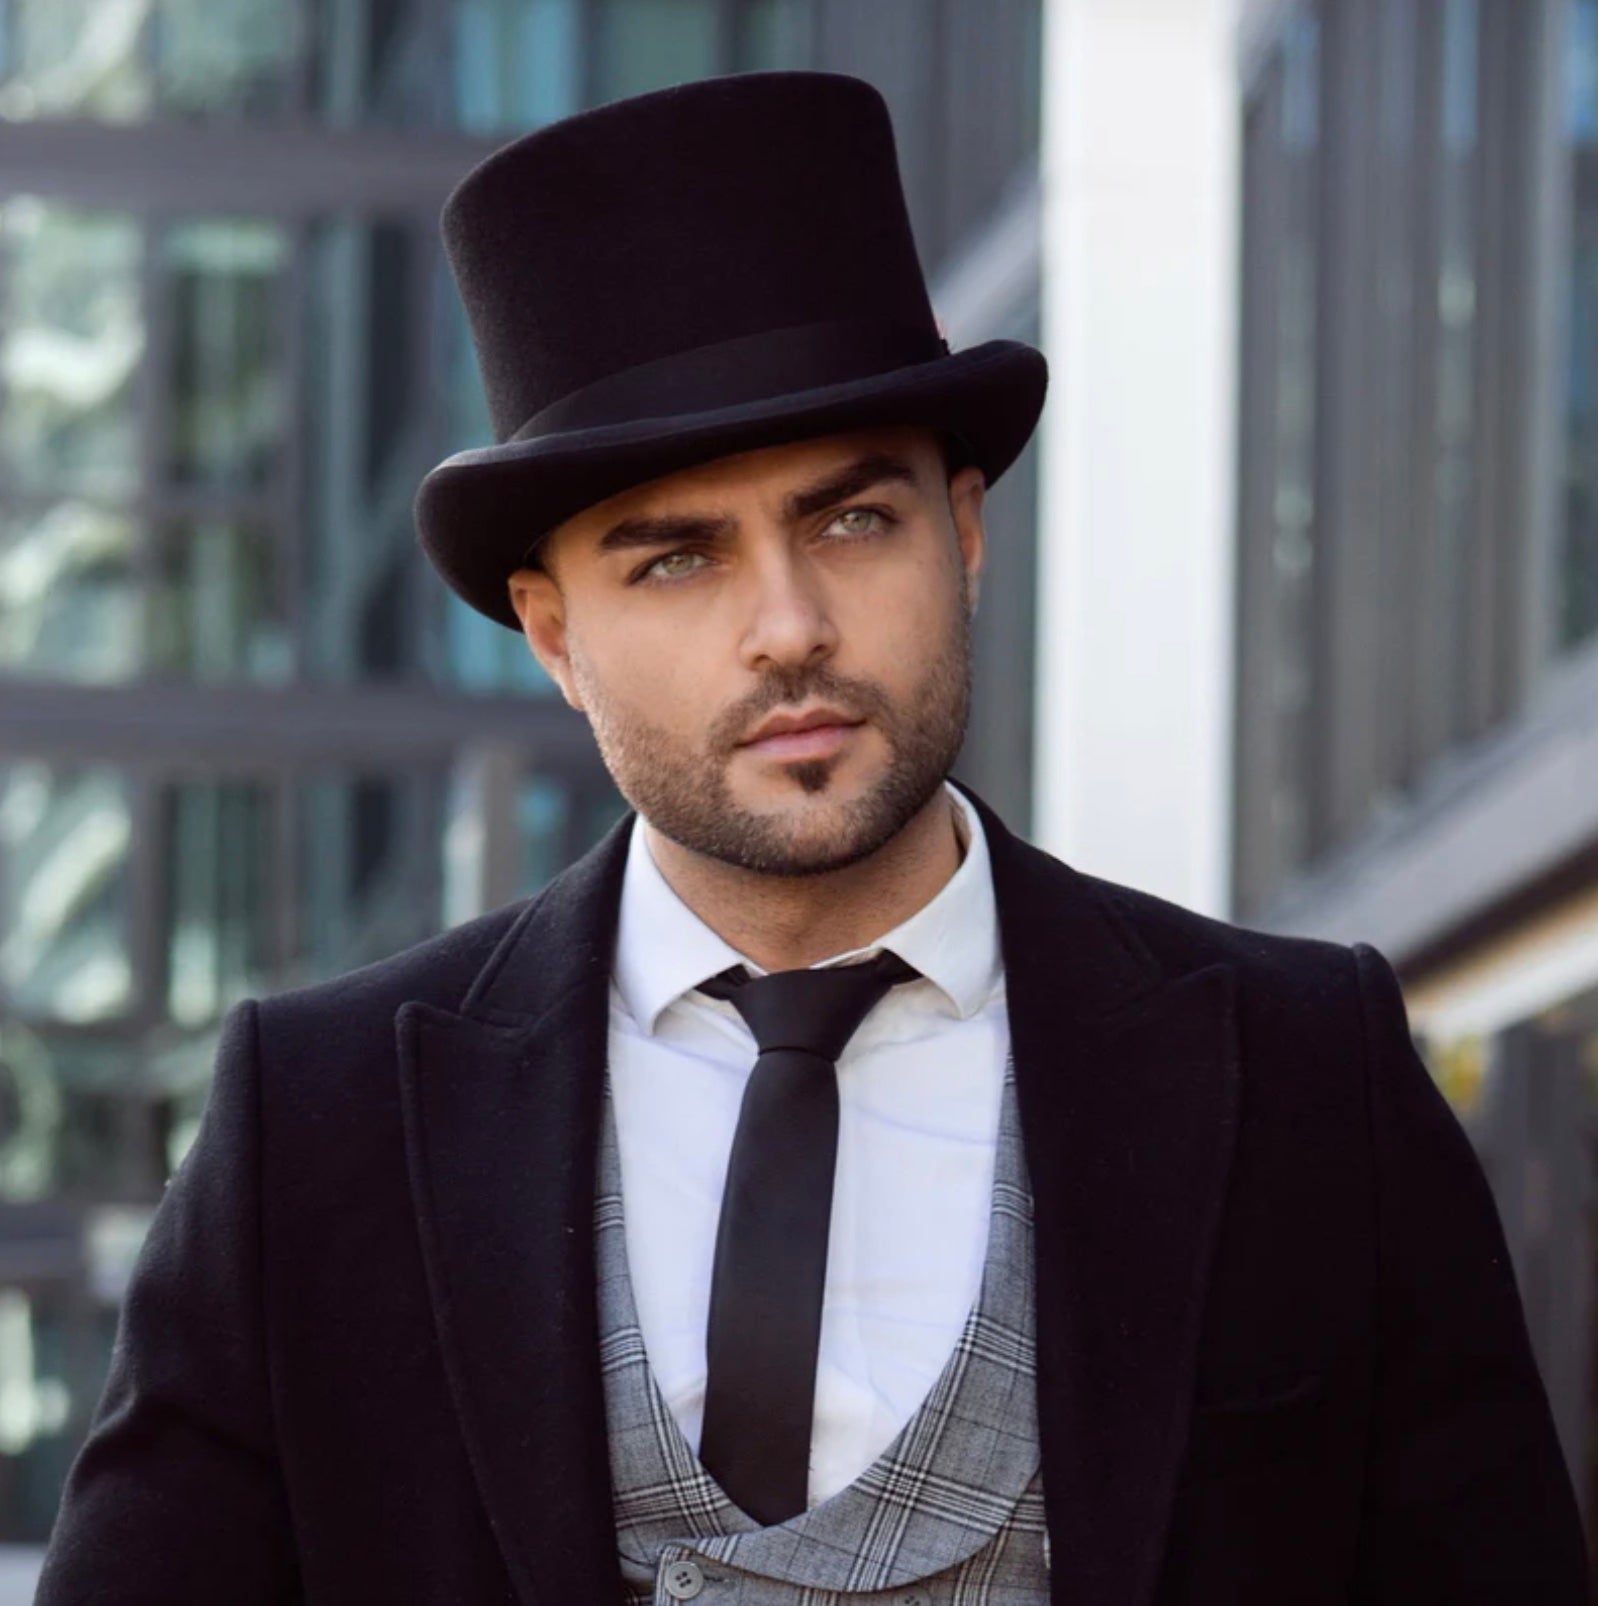 Traditional Top Hat-SF801